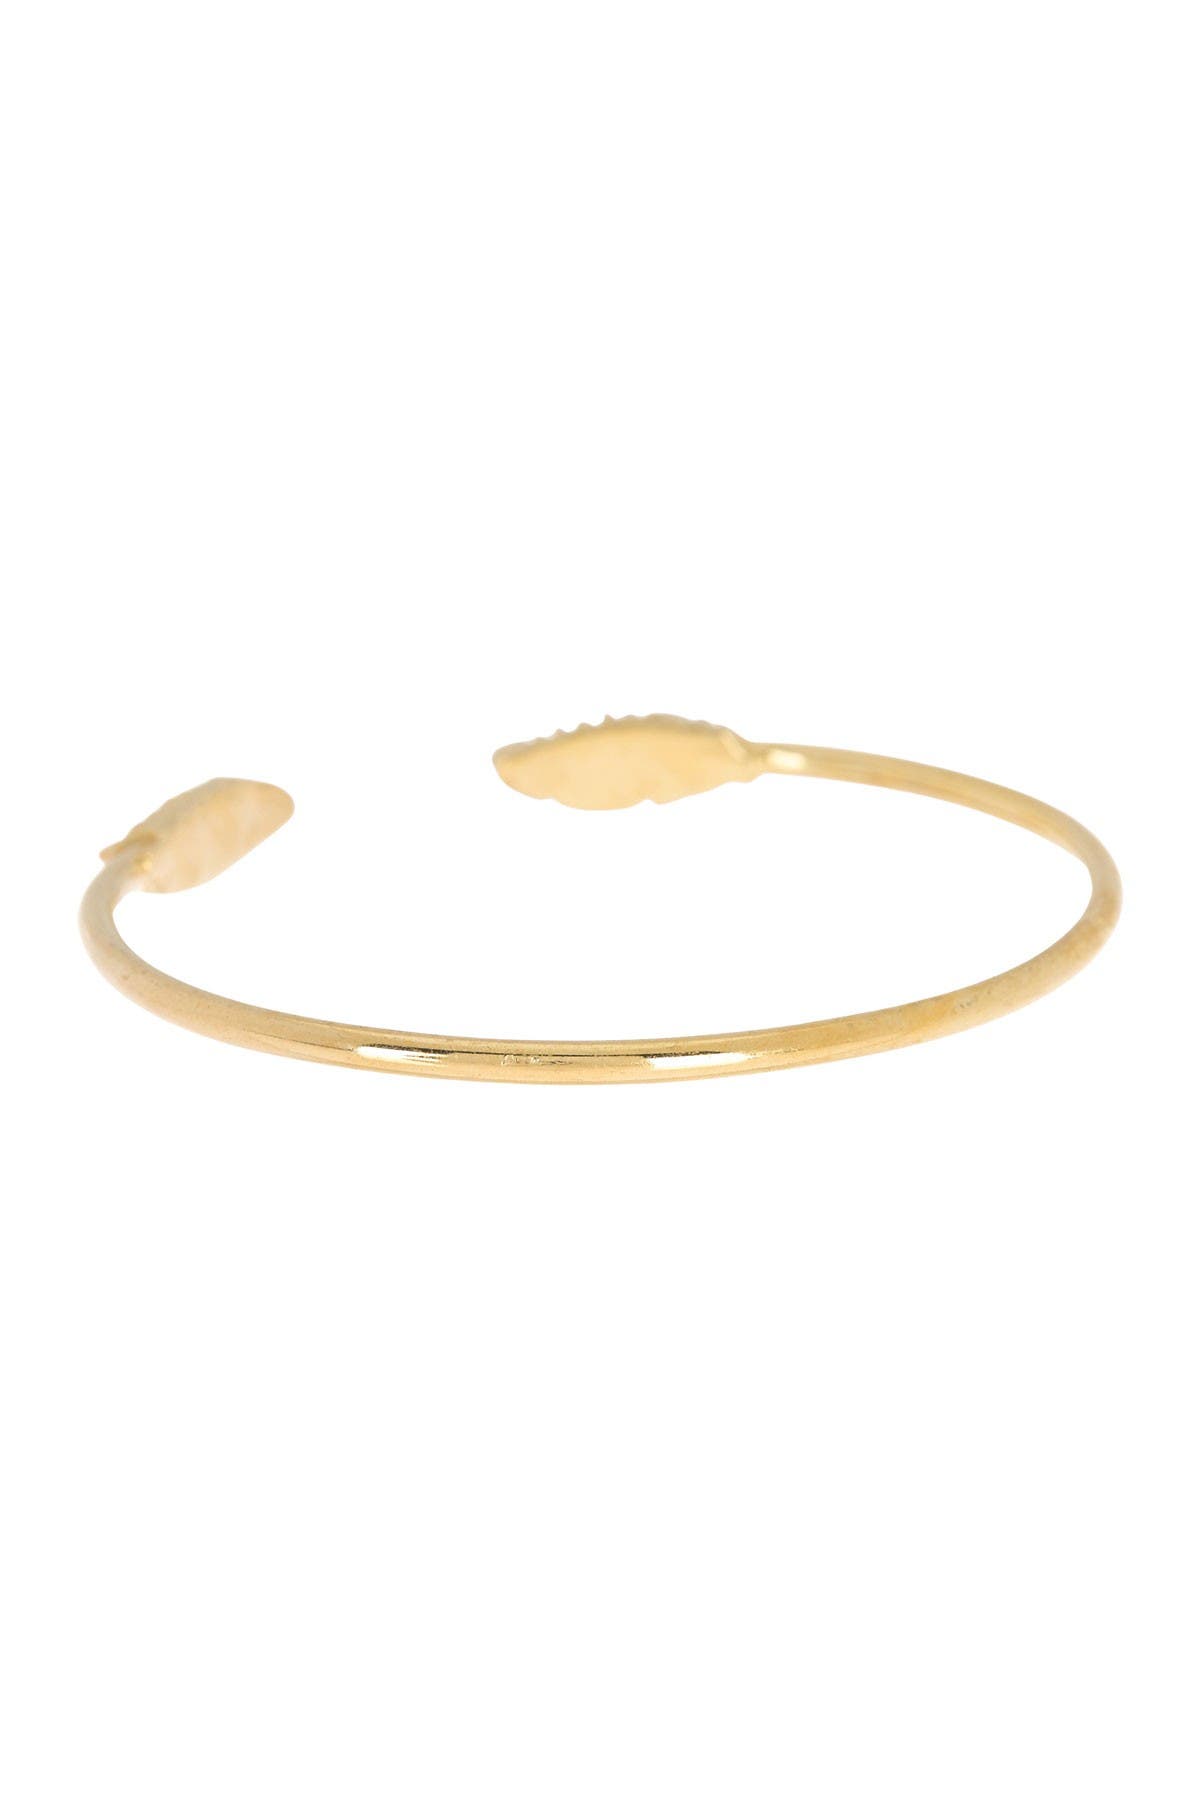 Alex And Ani 14k Gold Plated Feather Open Cuff Bracelet In Rust/copper